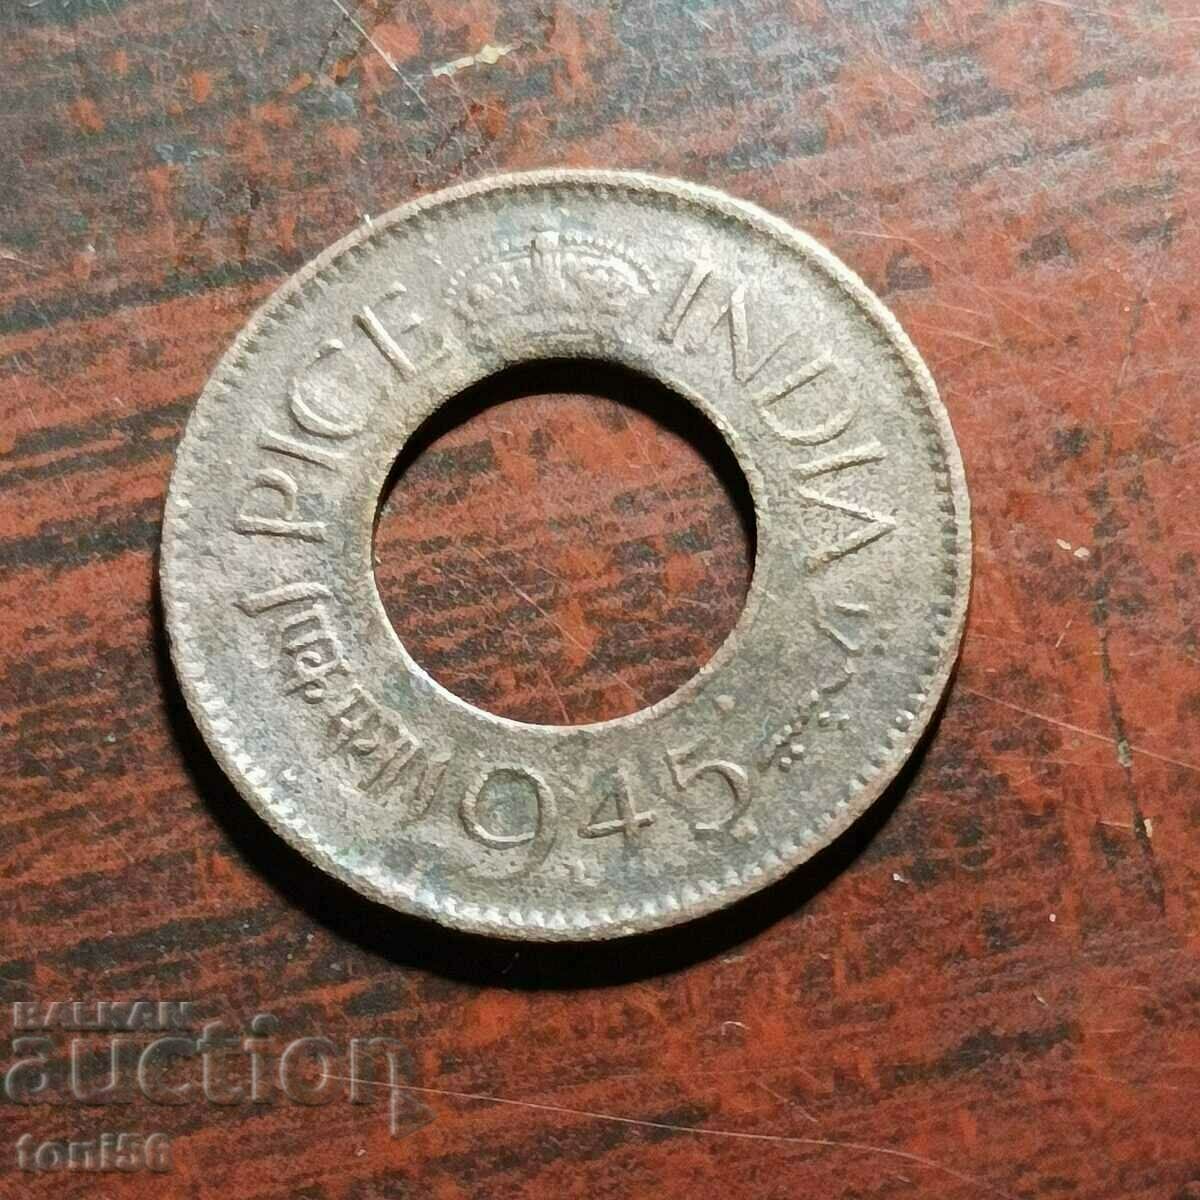 India 1 paise 1945 - wide crown